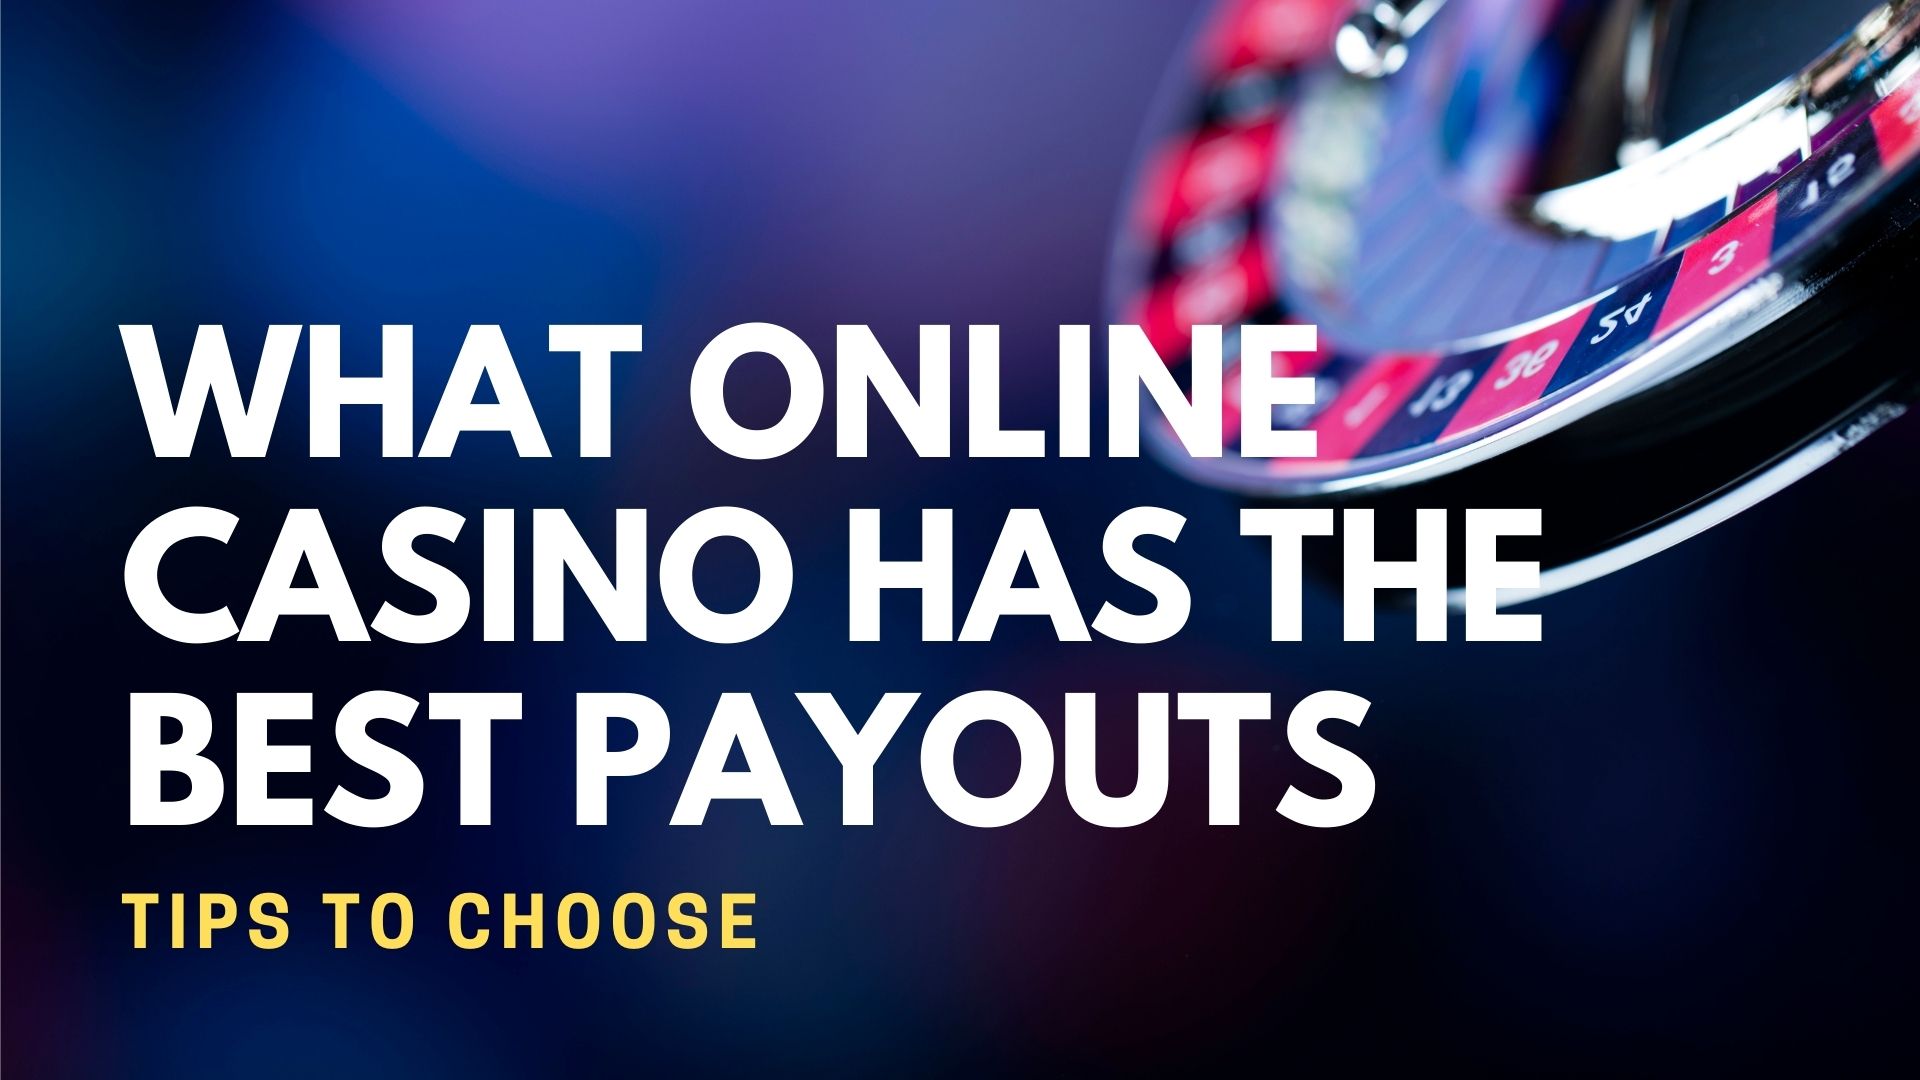 Top 6 Online Casinos With The Best Payouts